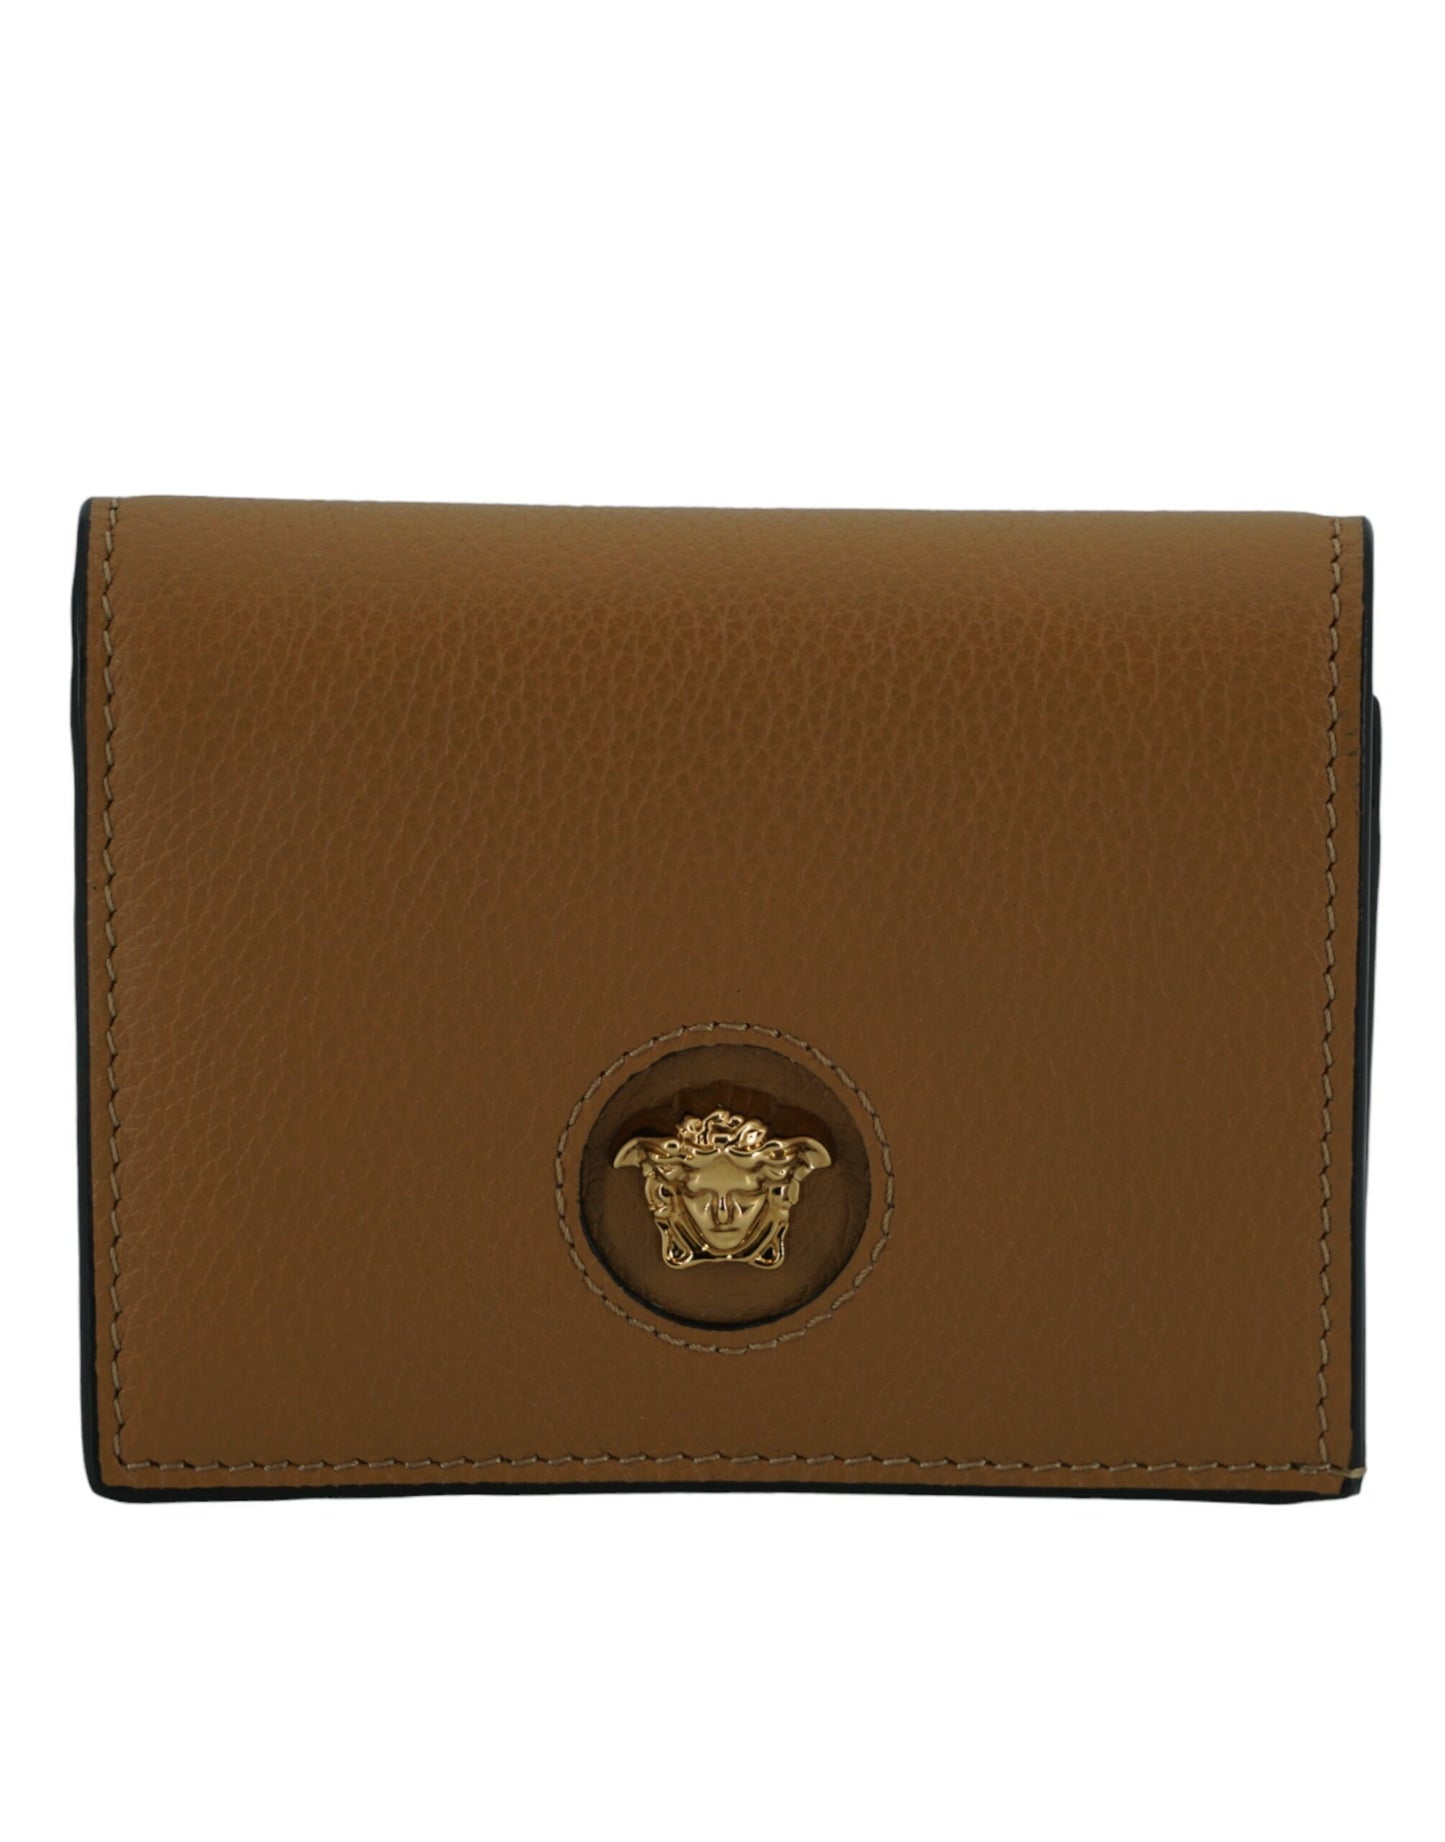 Elegant Compact Leather Wallet in Brown